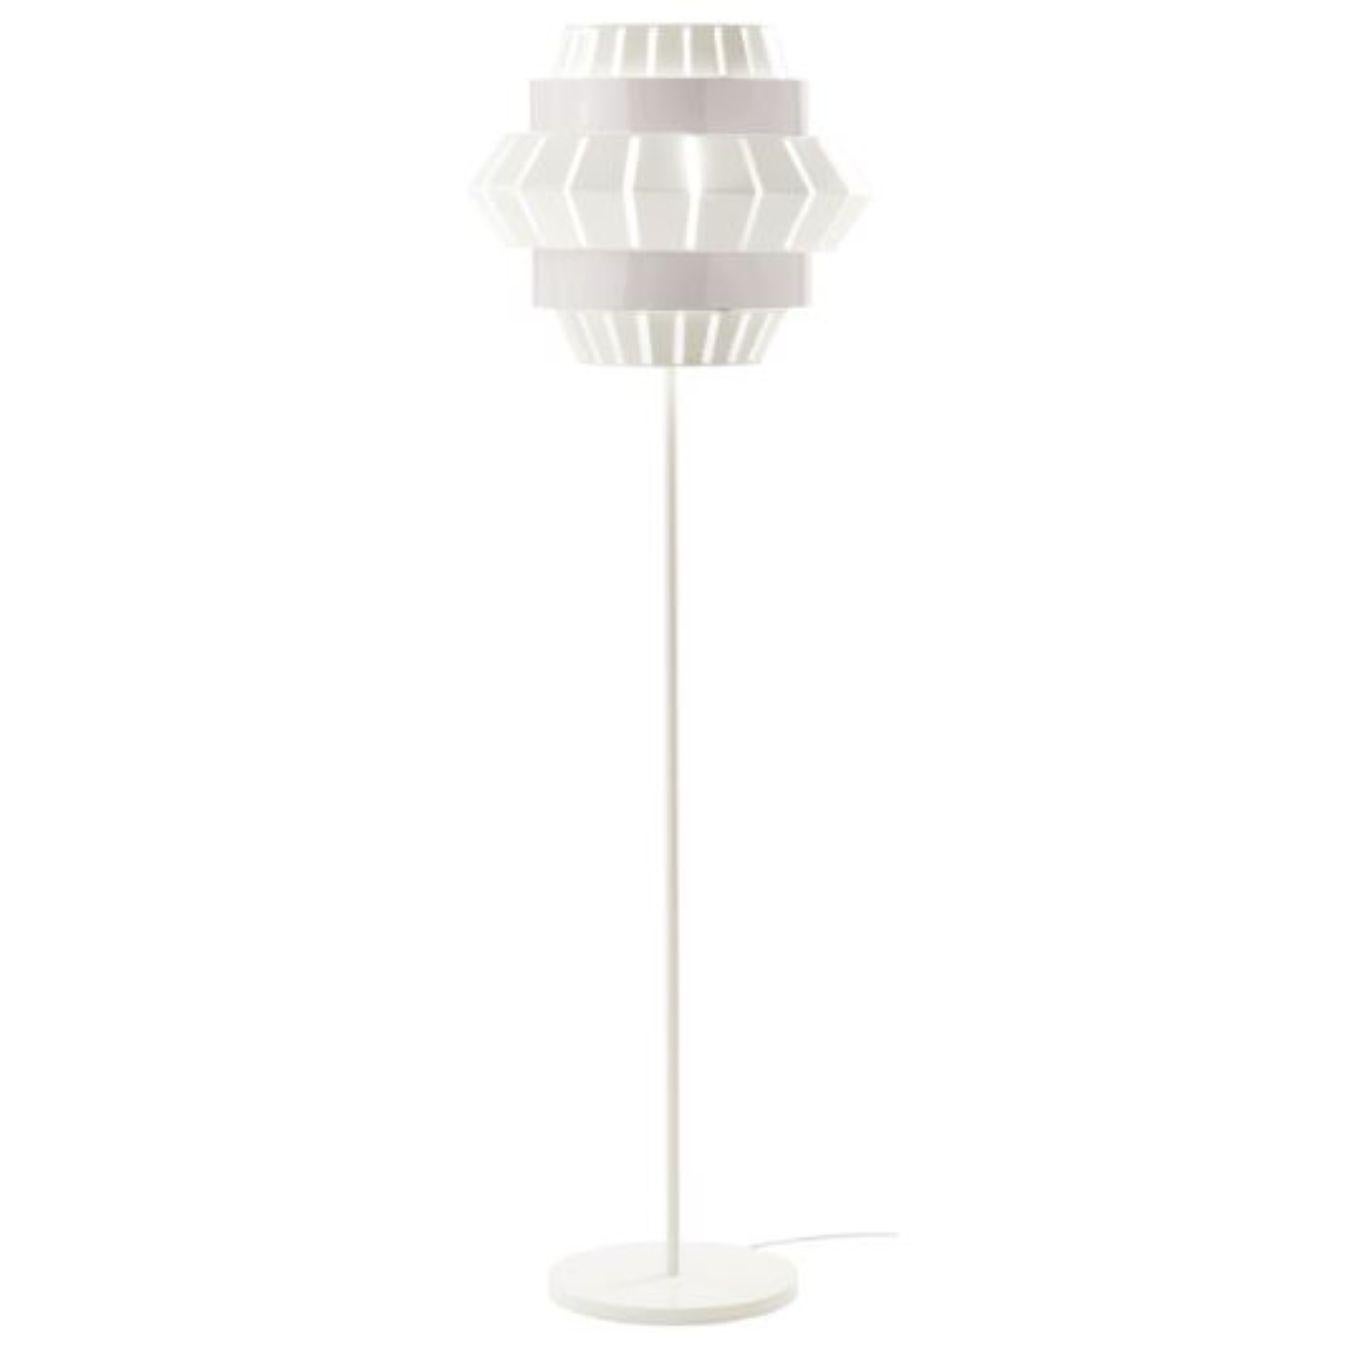 Ivory and Taupe comb floor lamp by Dooq
Dimensions: W 54 x D 54 x H 175 cm
Materials: lacquered metal.
Also available in different colors and materials.

Information:
230V/50Hz
E27/1x20W LED
120V/60Hz
E26/1x15W LED
bulb not included

All